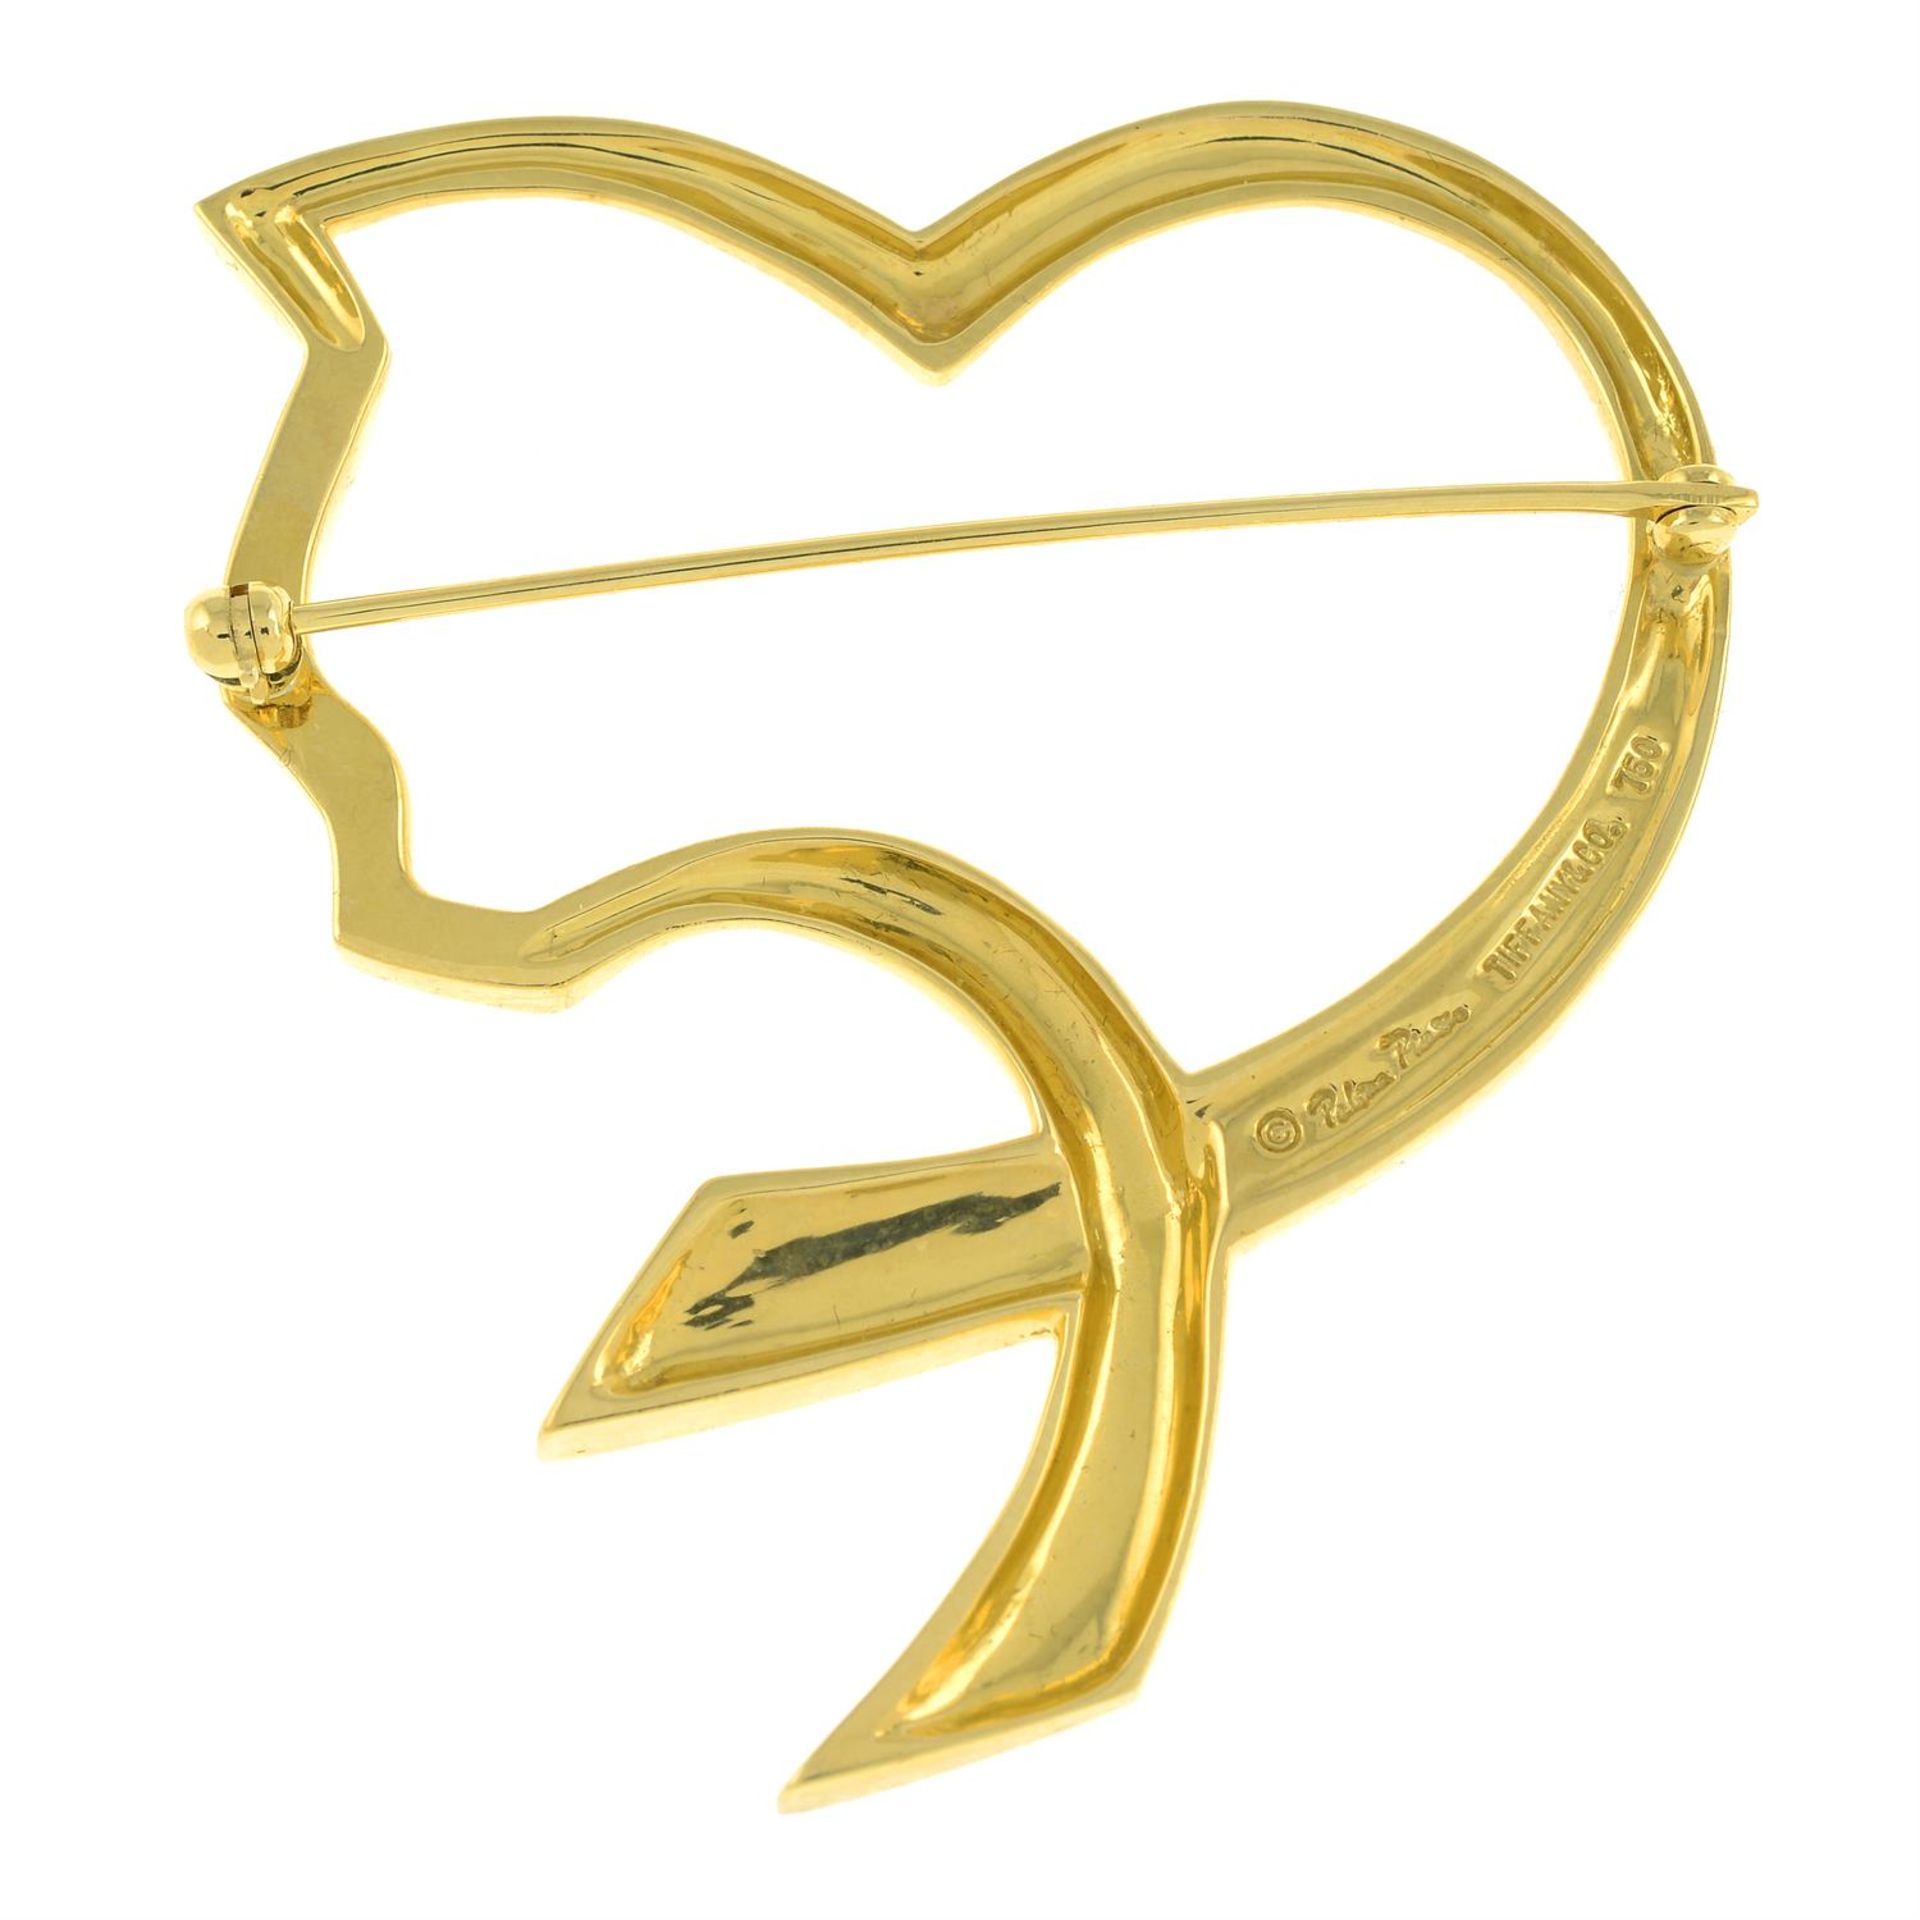 A stylised cat and heart brooch, by Paloma Picasso for Tiffany & Co. - Image 3 of 4